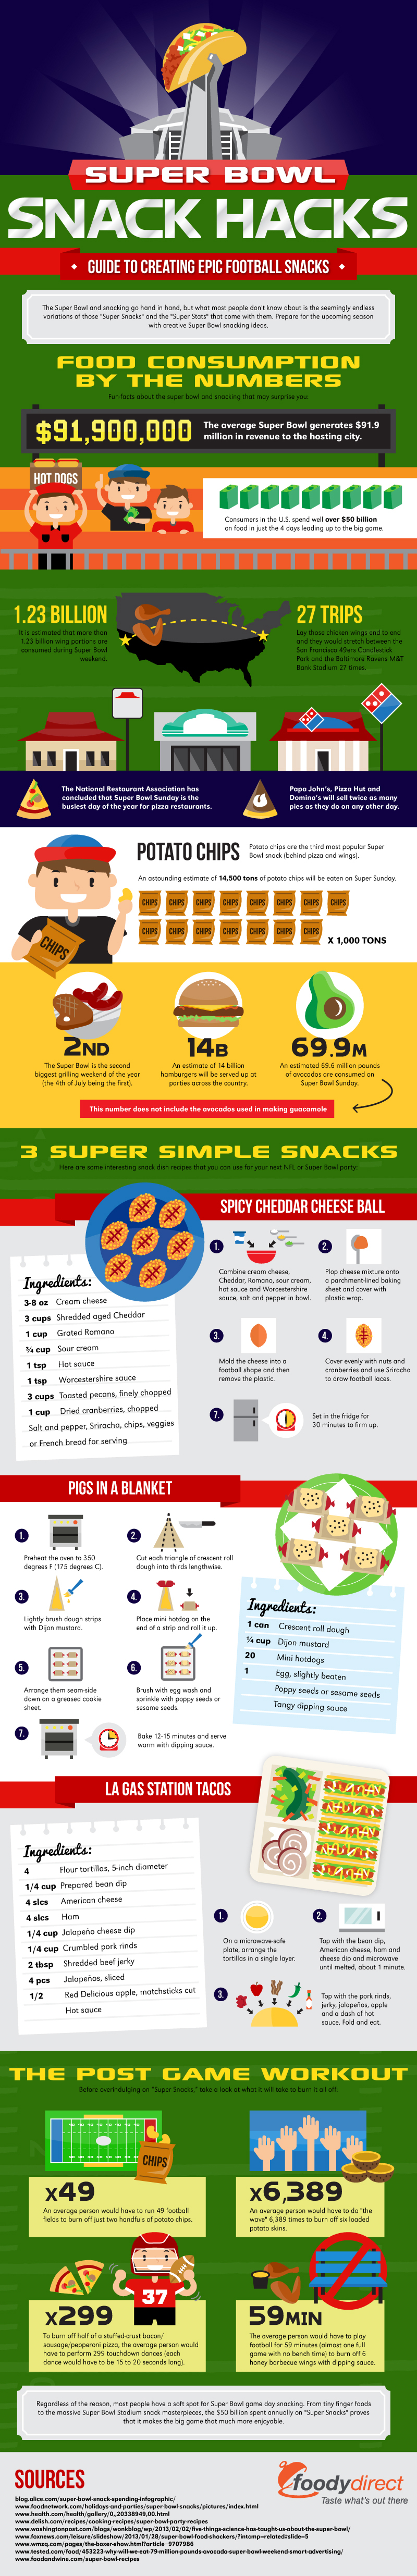 Football & Food Infographic by FoodyDirect